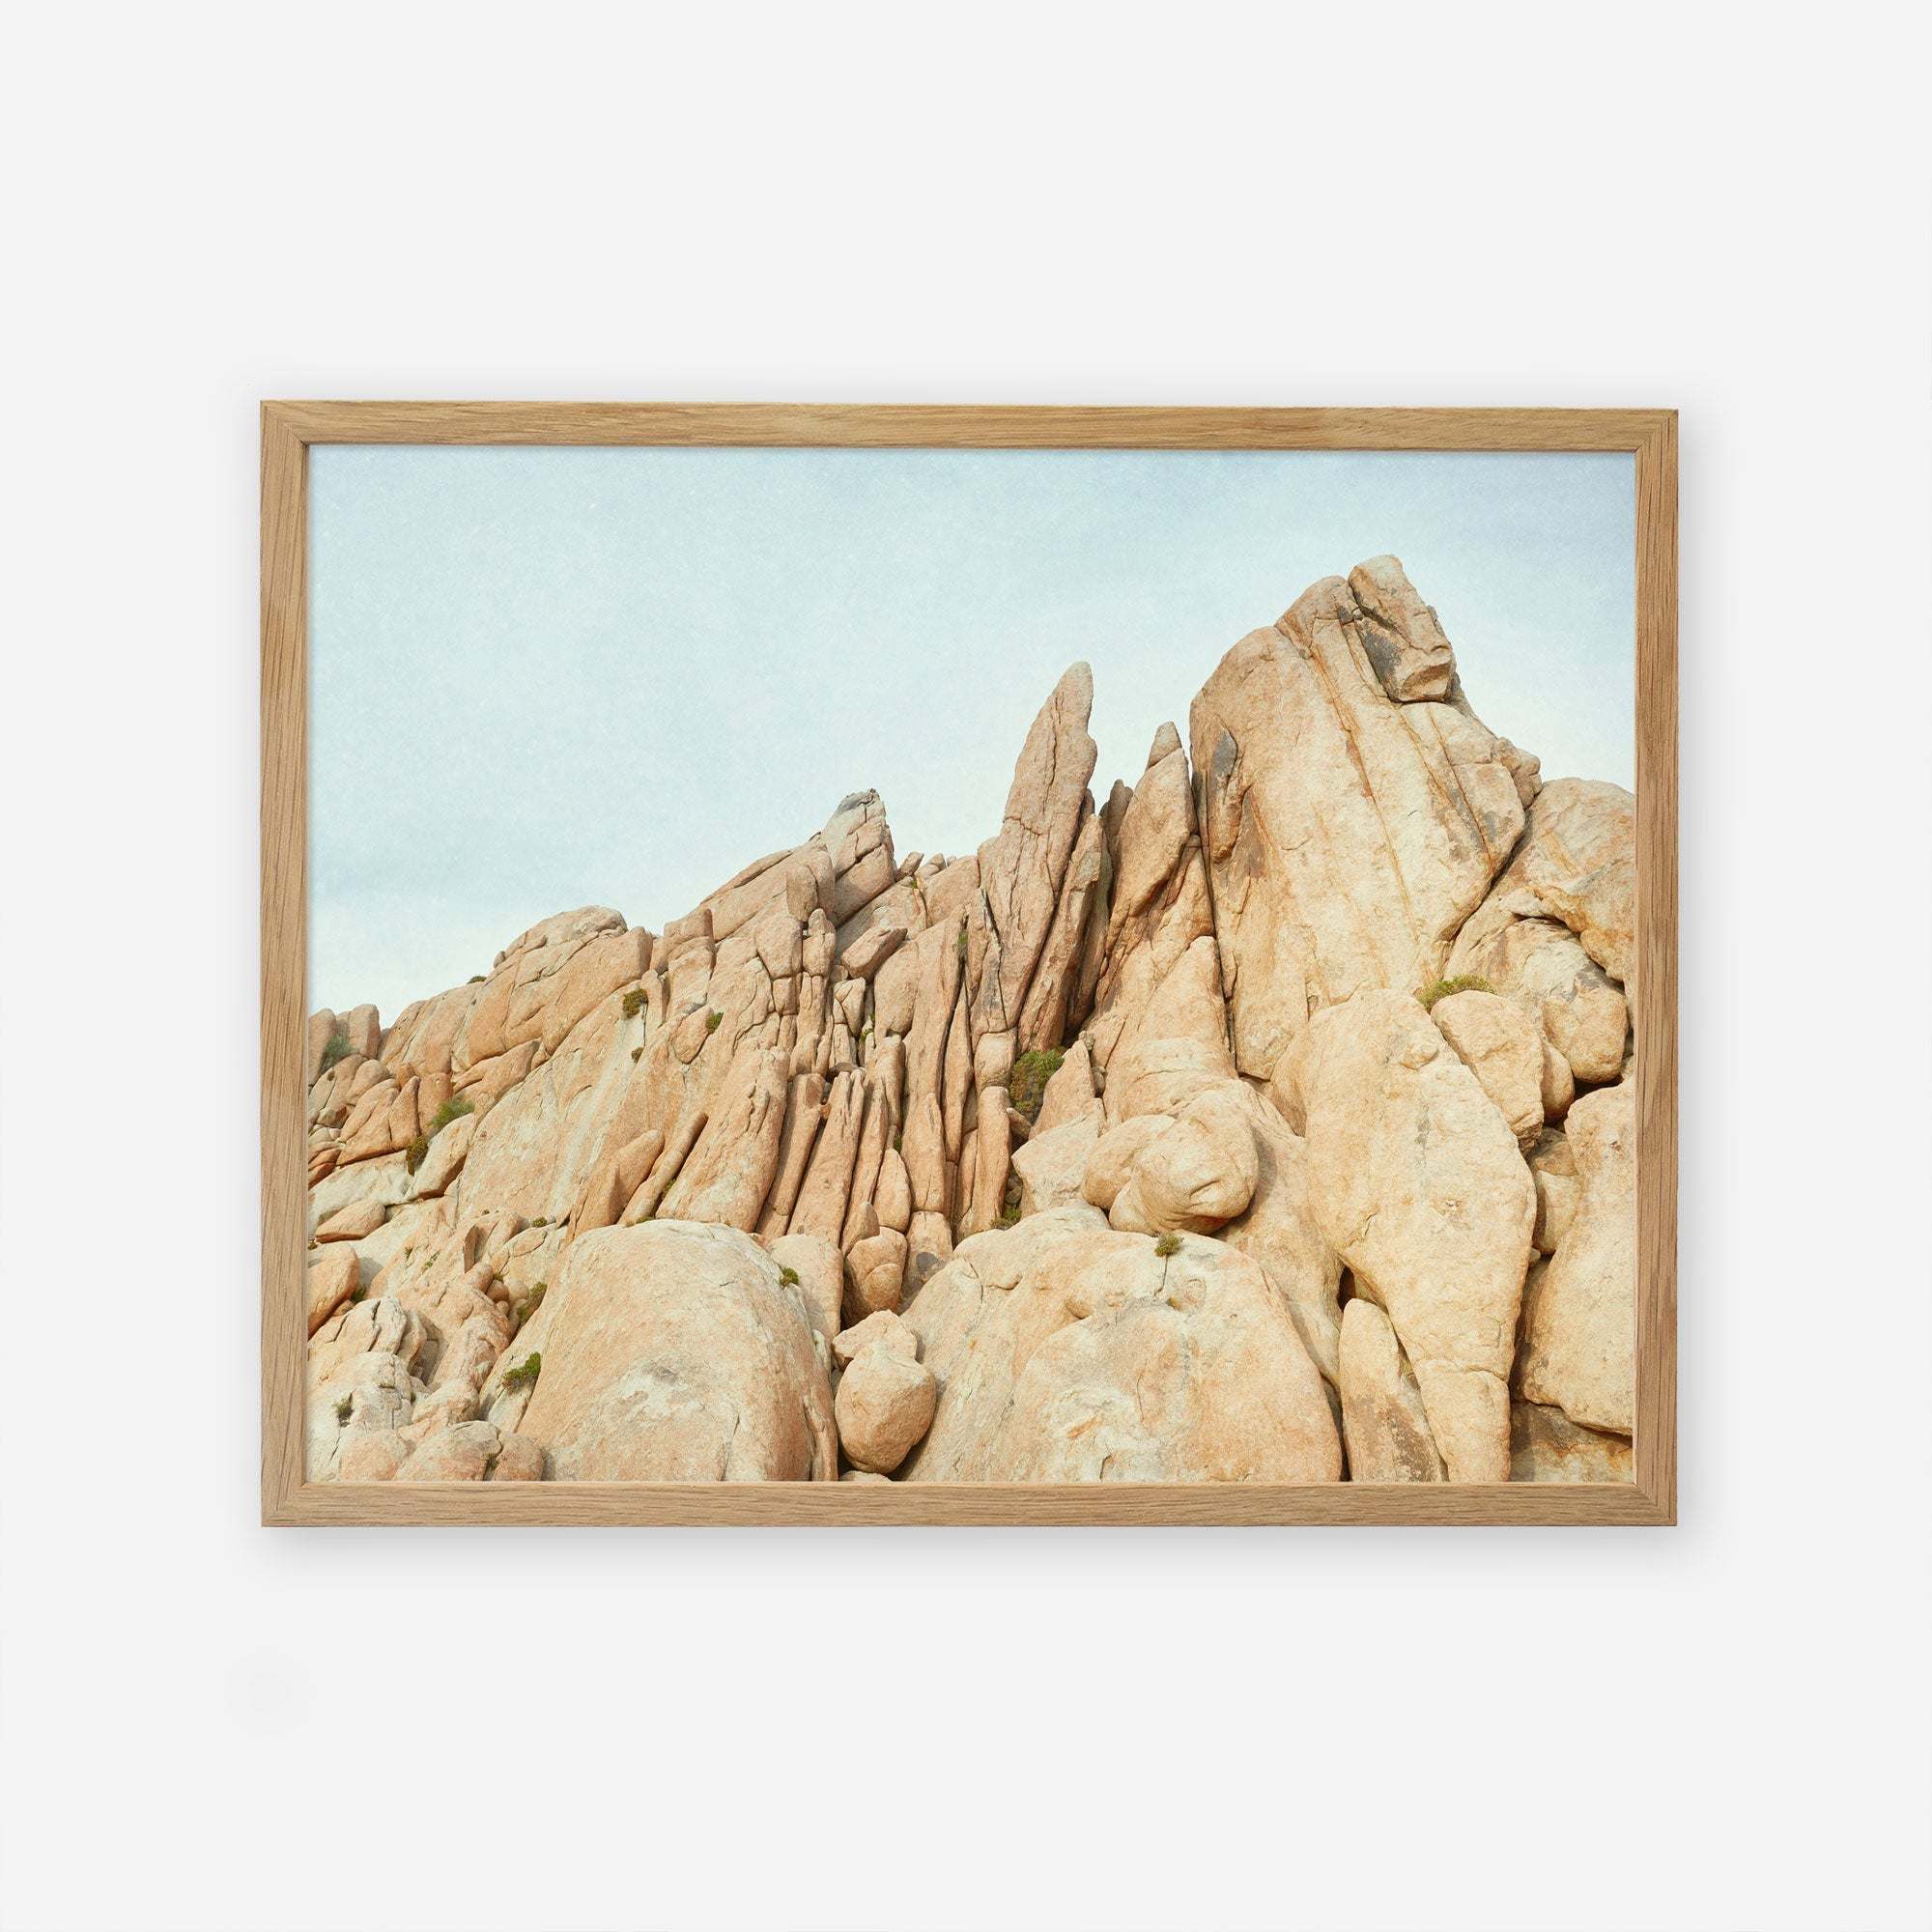 A framed photograph of a rugged rocky landscape featuring tall, narrow rock formations and boulders under a clear sky, printed on archival photographic paper. The frame is simple and made of light wood. This is the Offley Green &#39;Joshua Rocks&#39; Joshua Tree Print.